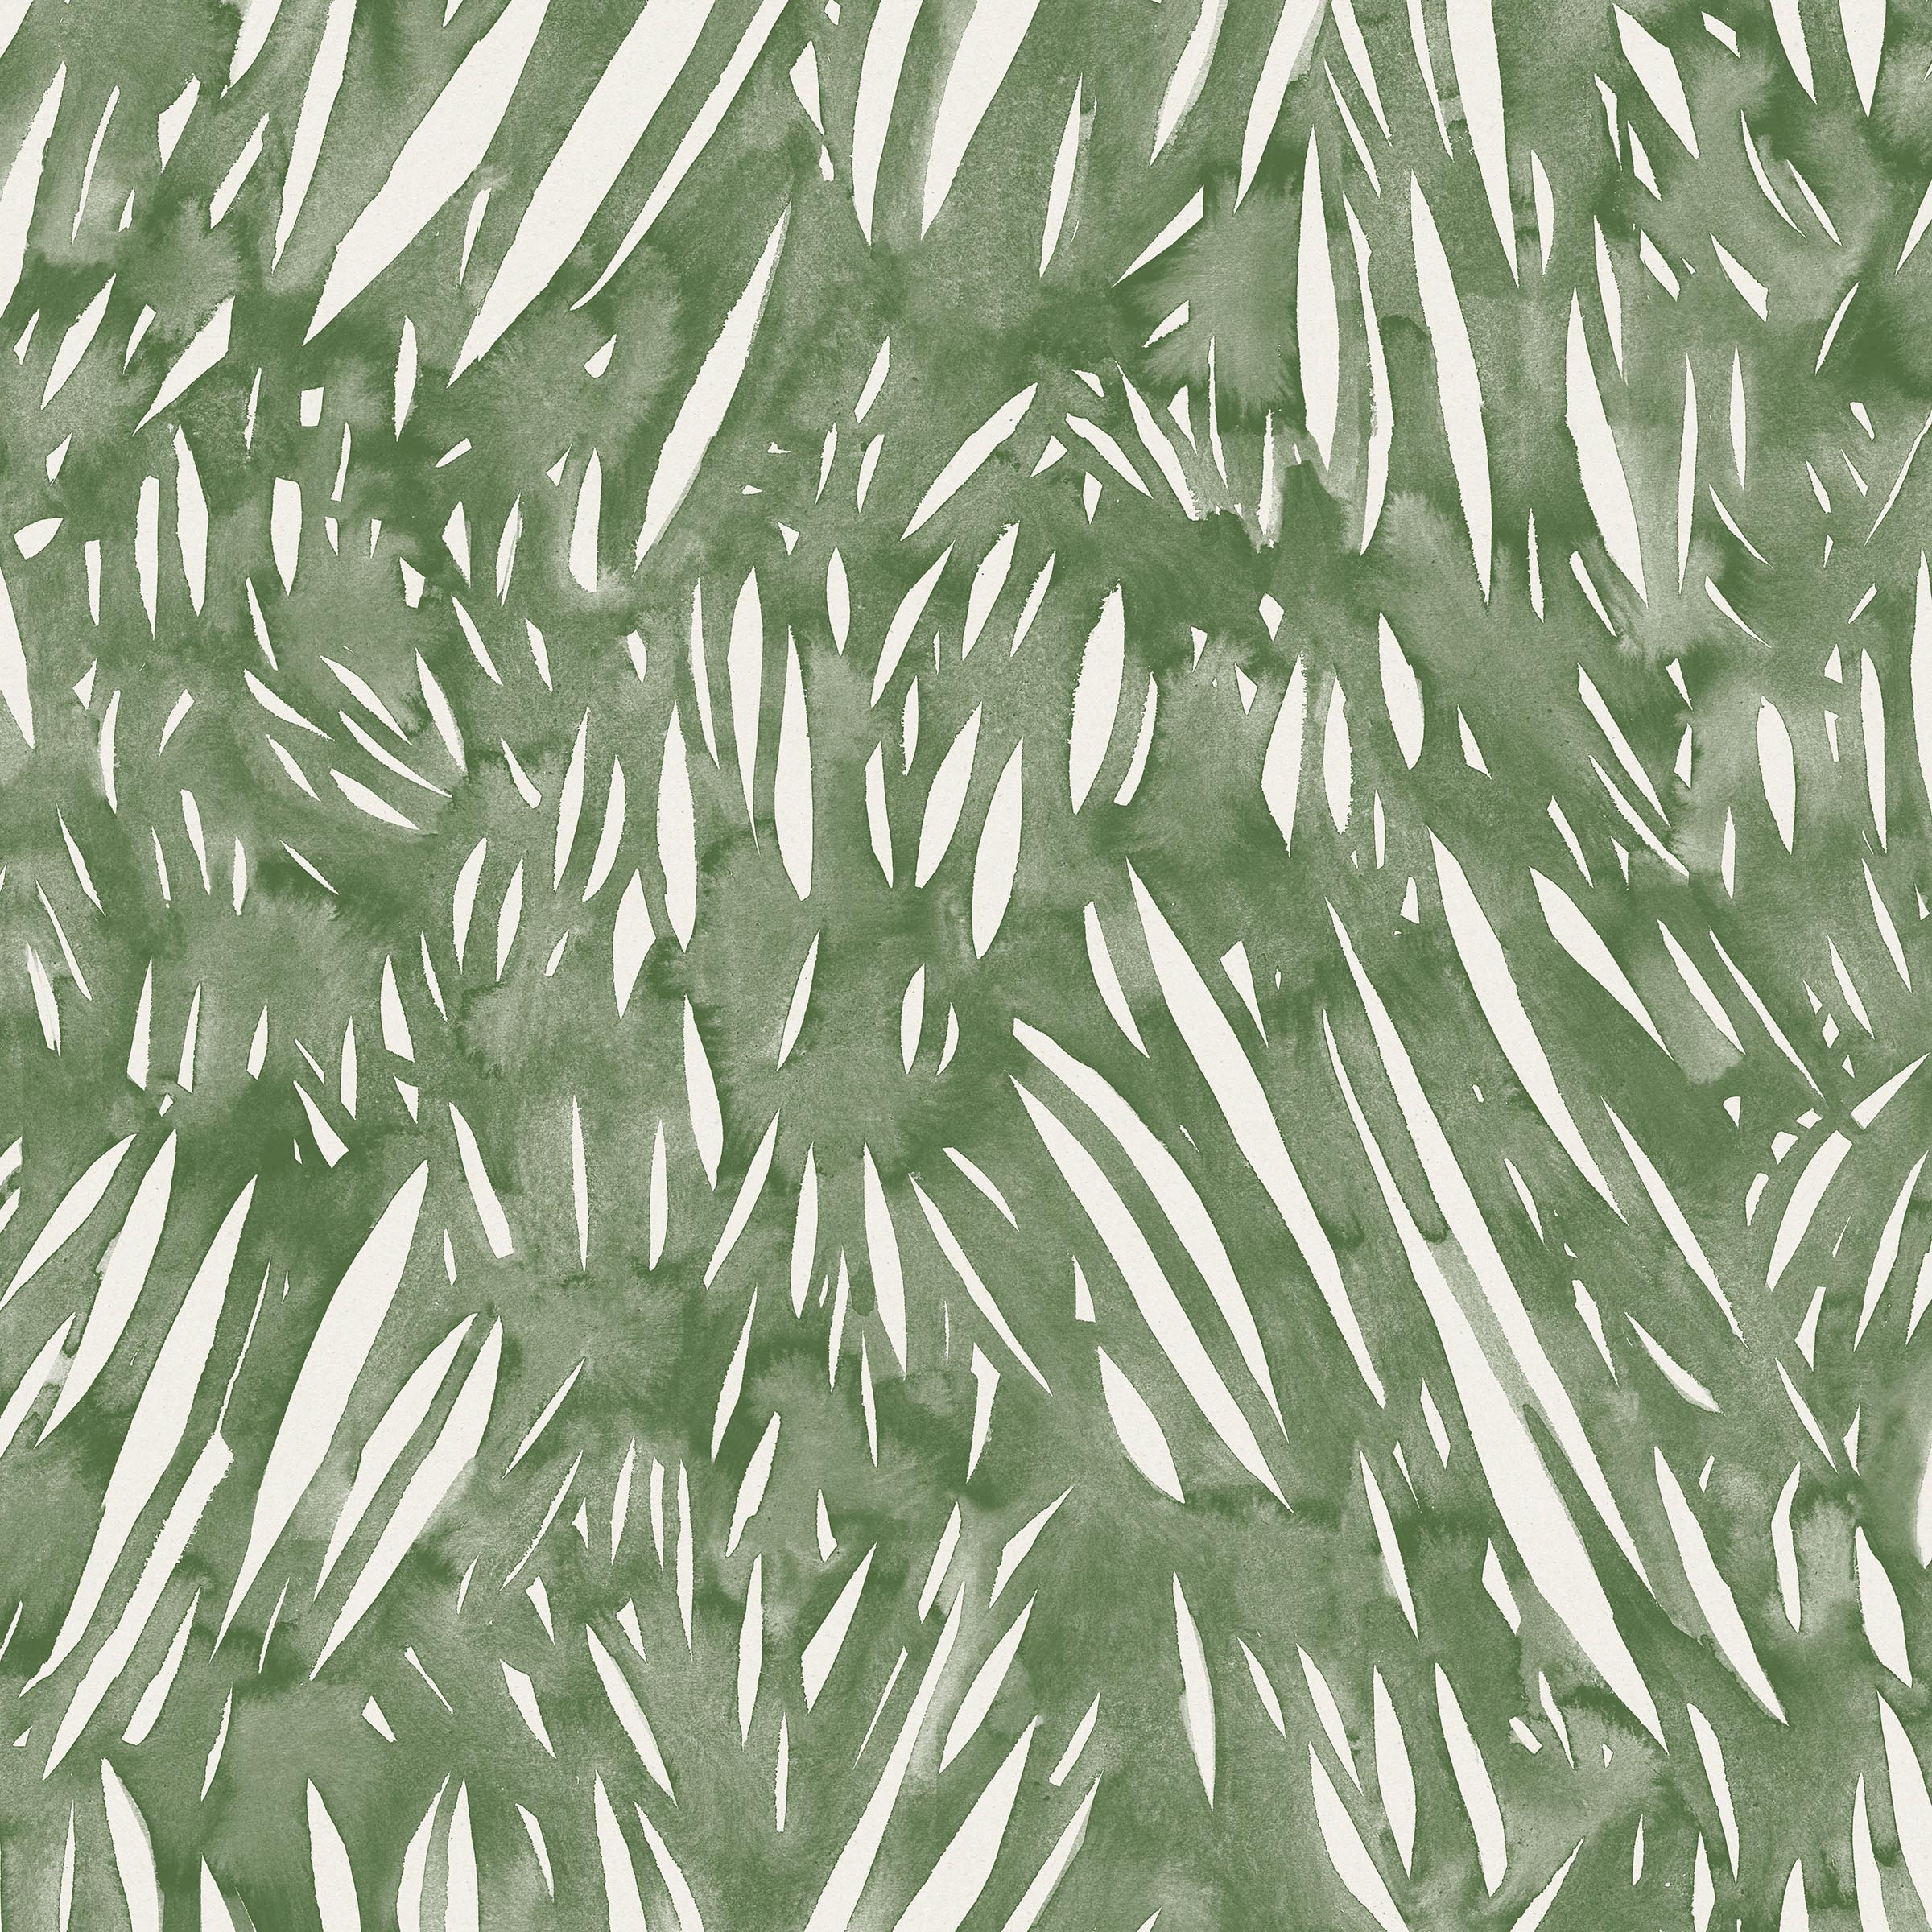 Detail of fabric in an abstract leaf pattern in white on a green watercolor field.